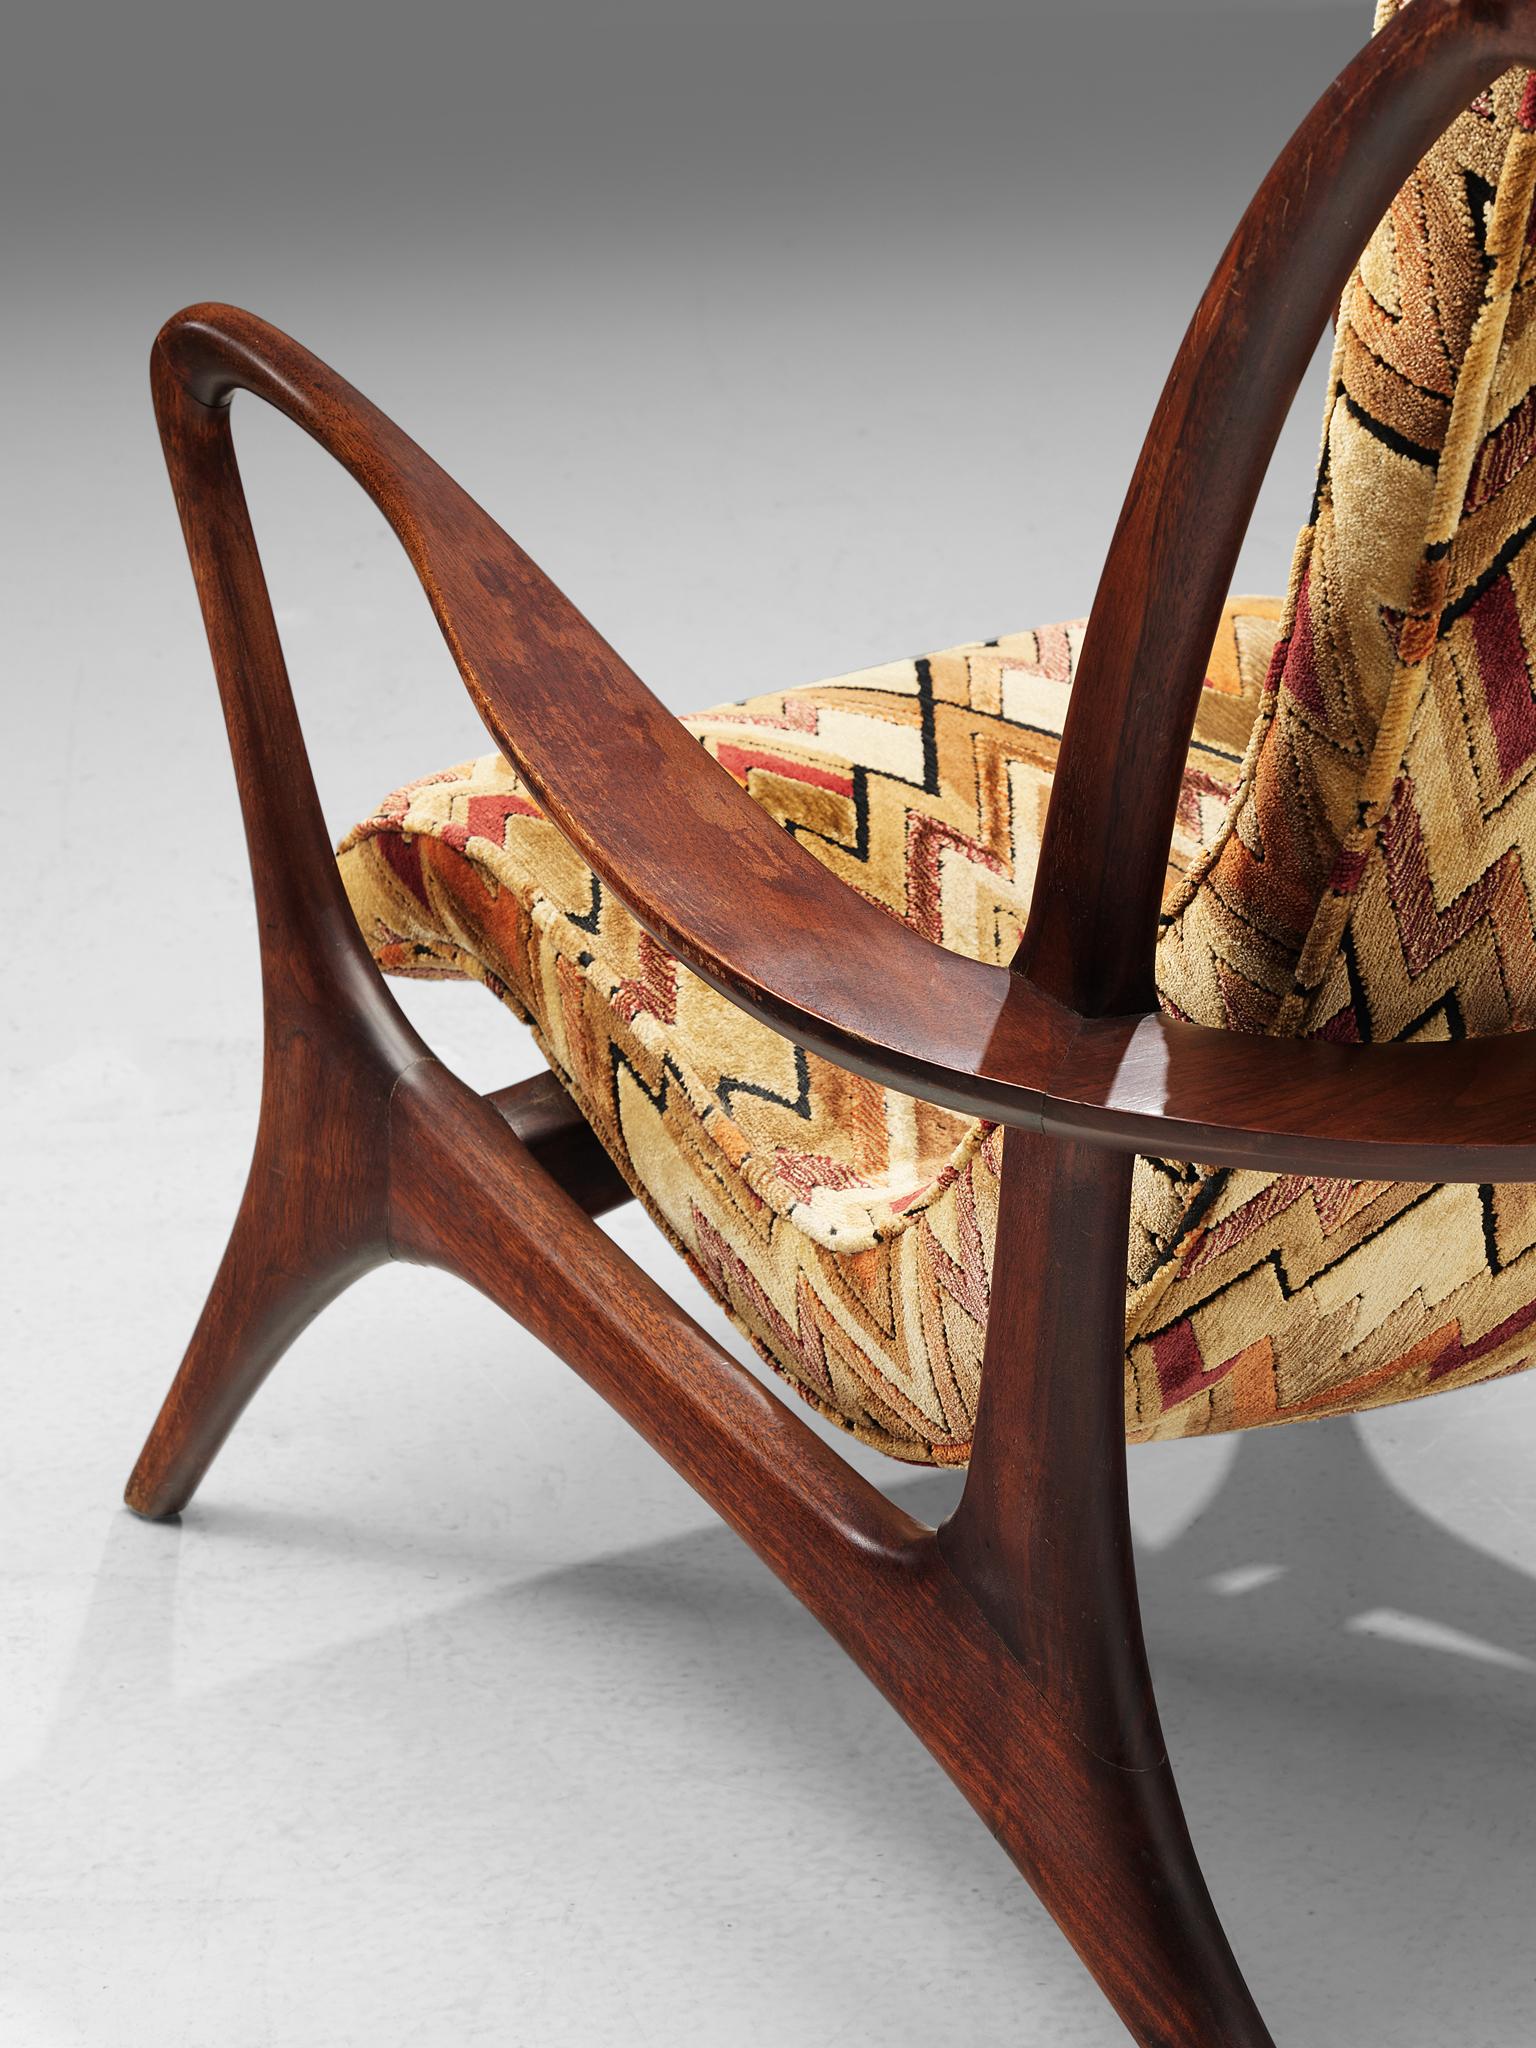 Vladimir Kagan 'Contour' Lounge Chair in Patterned Upholstery 1